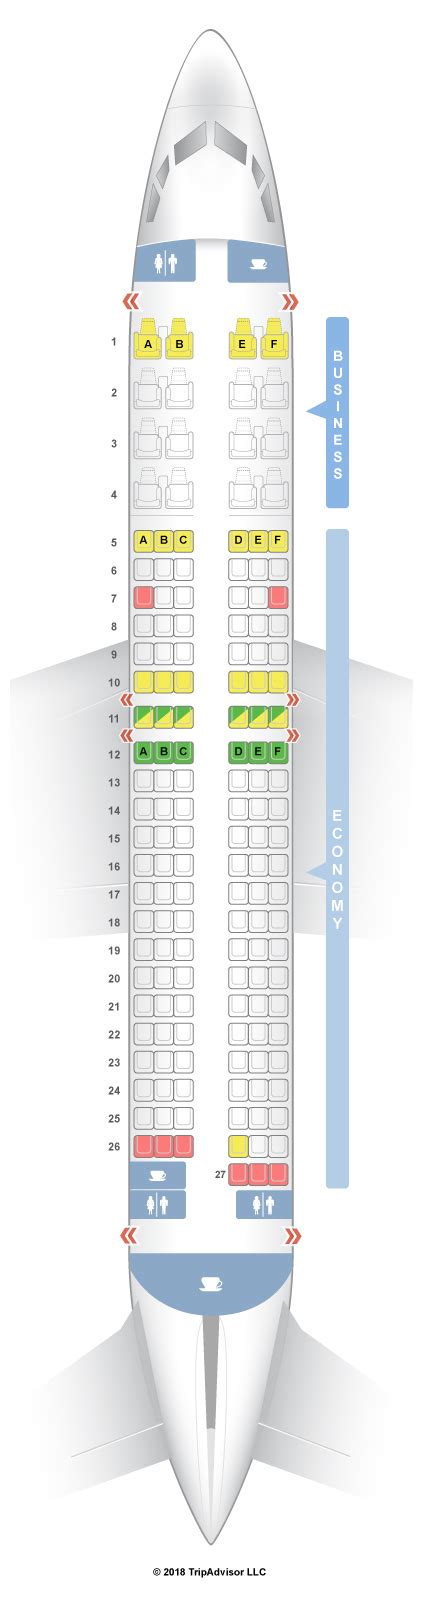 Turkish Airlines Boeing 737 800 Seat Map